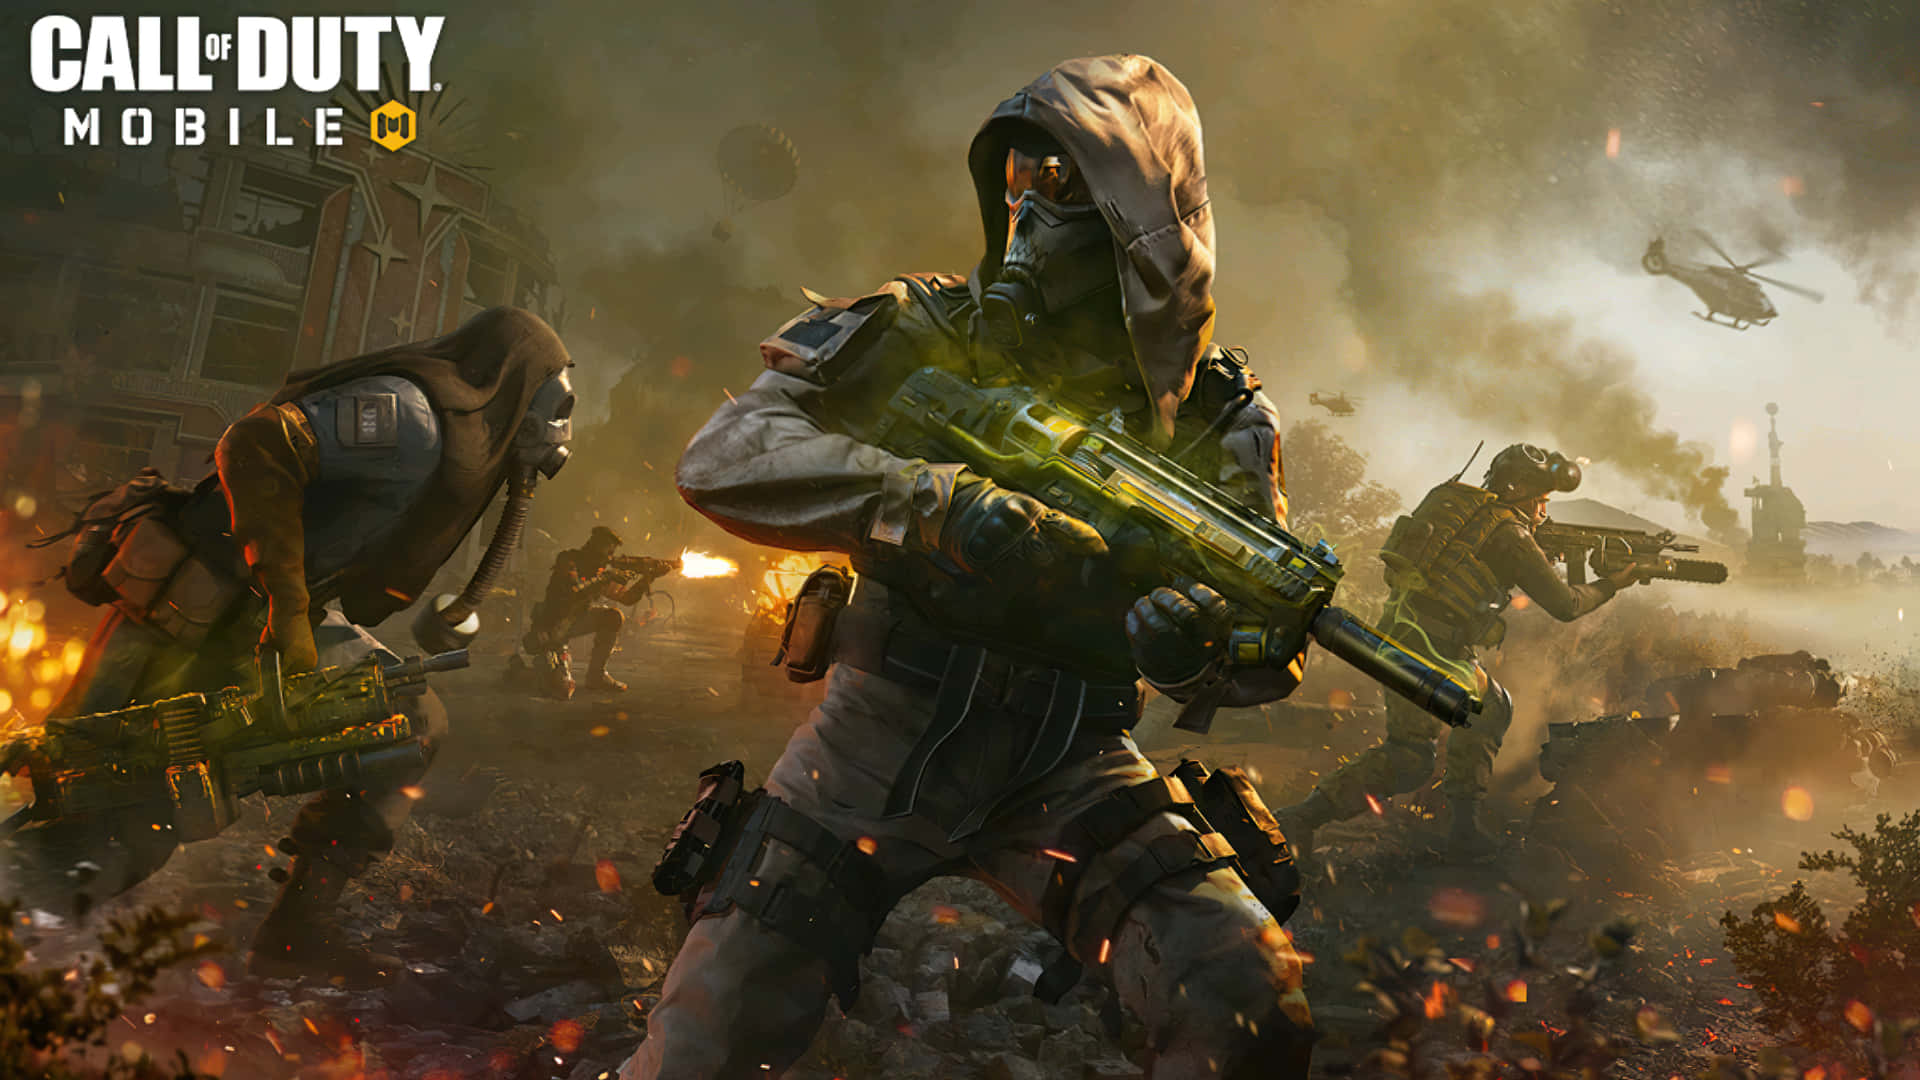 Experience The Thrills Of Call Of Duty In Stunning Hd Wallpaper